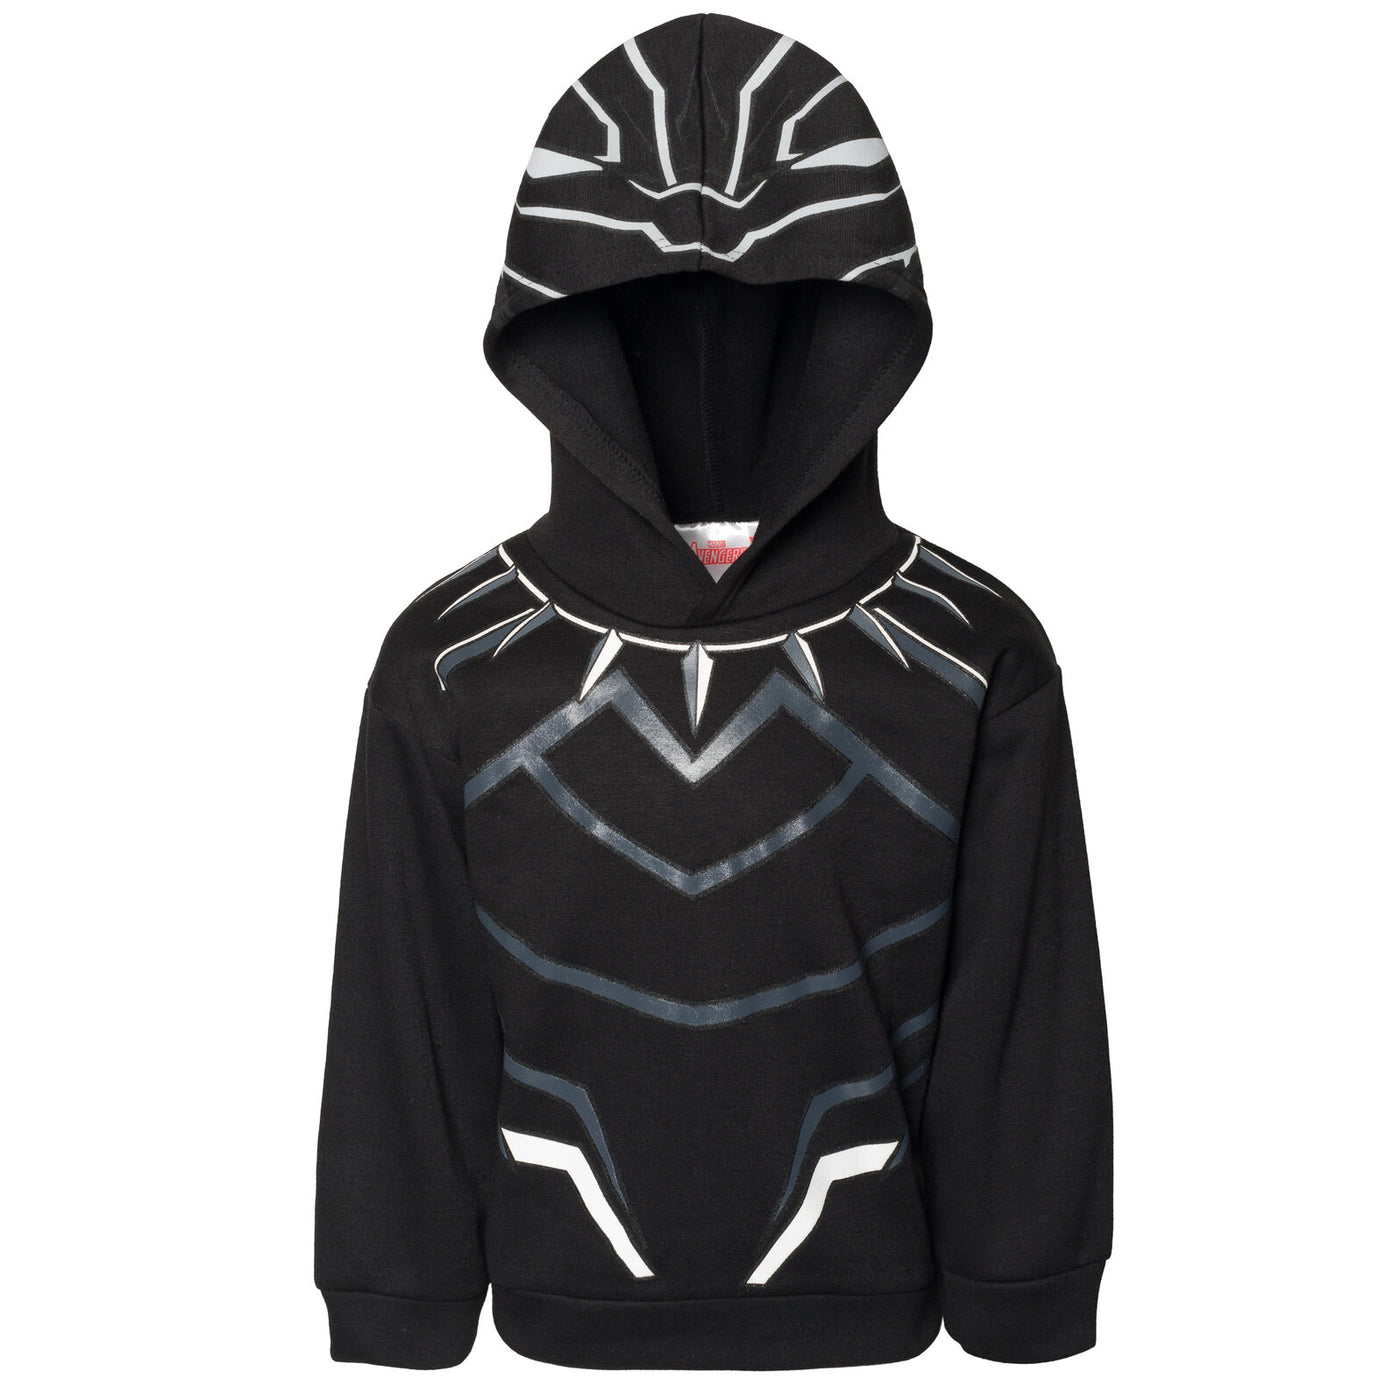 Marvel Avengers Black Panther Fleece Athletic Pullover Hoodie and Pants Outfit Set